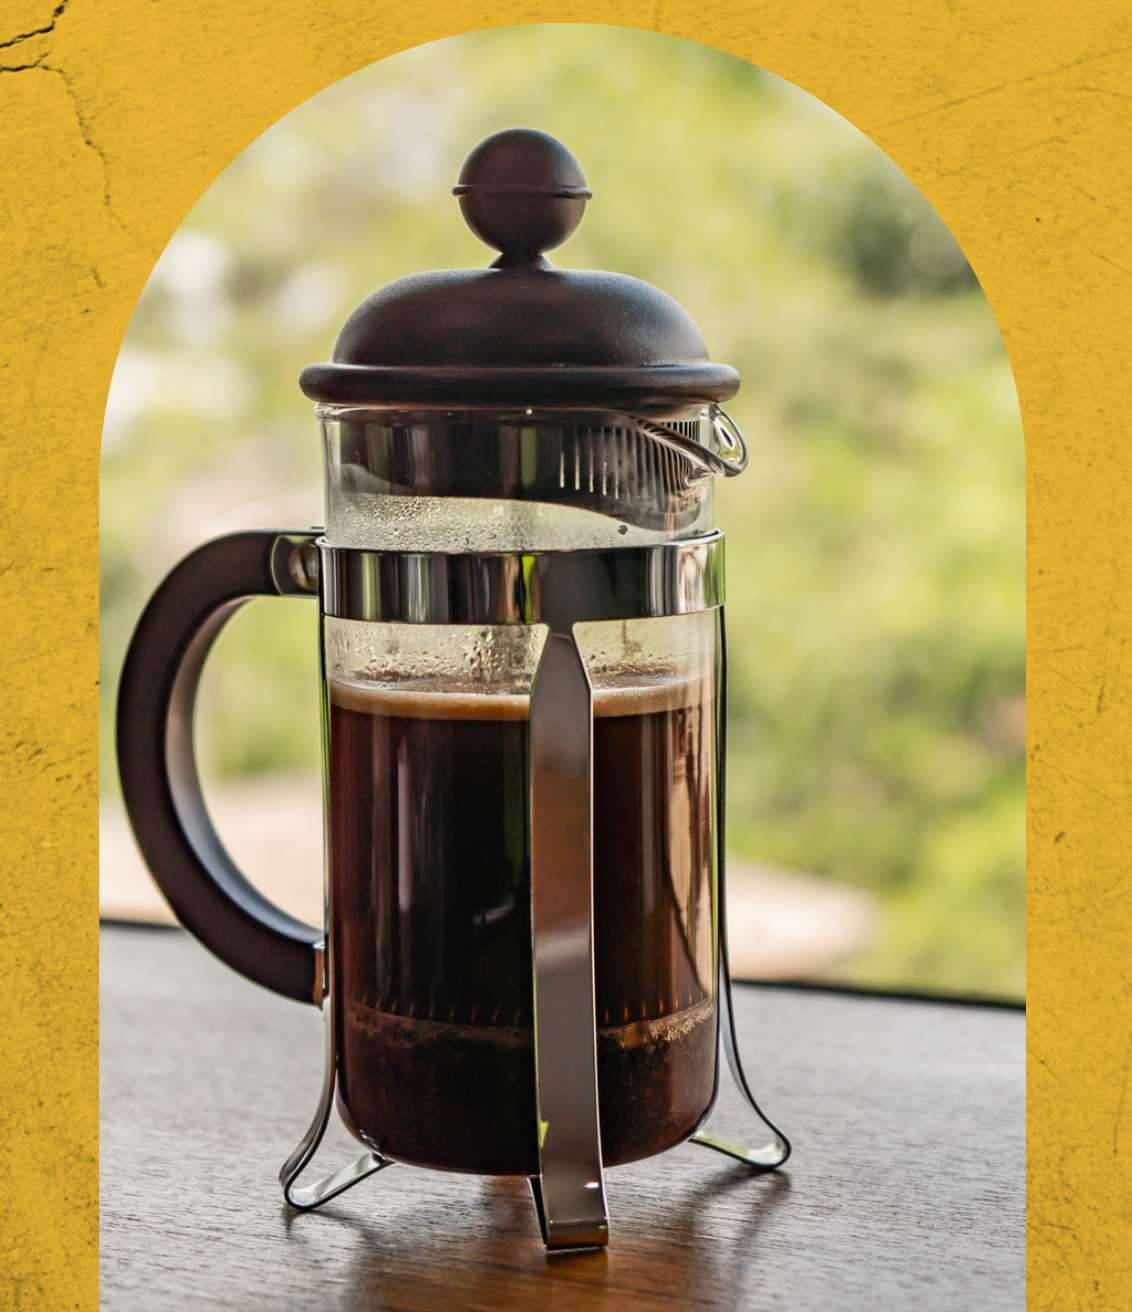 5 highly rated French press coffee makers in 2022